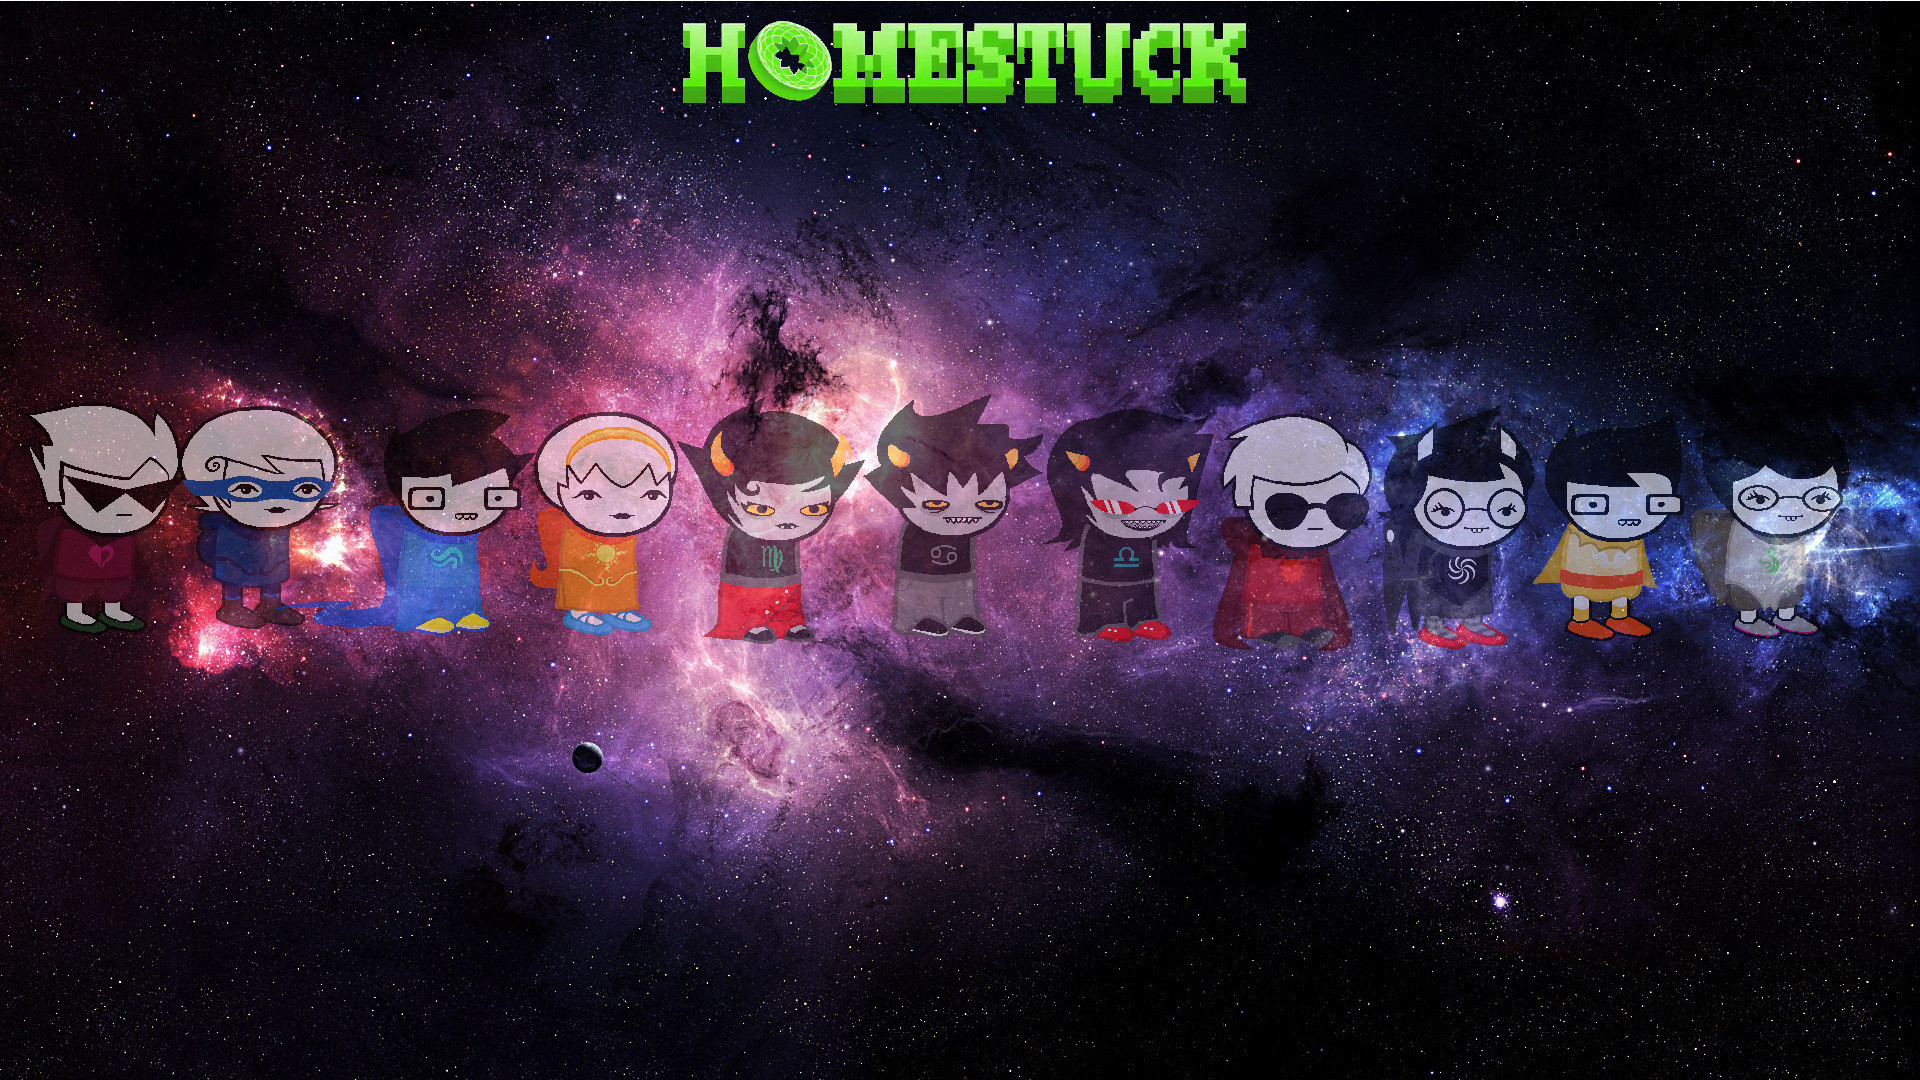 1920x1080 Made a Homestuck Wallpaper for you guys! [] Need #iPhone #6S #Plus  #Wallpaper/ #Background for #IPhone6SPlus? Follow iPhone 6S Plus 3Wallp…